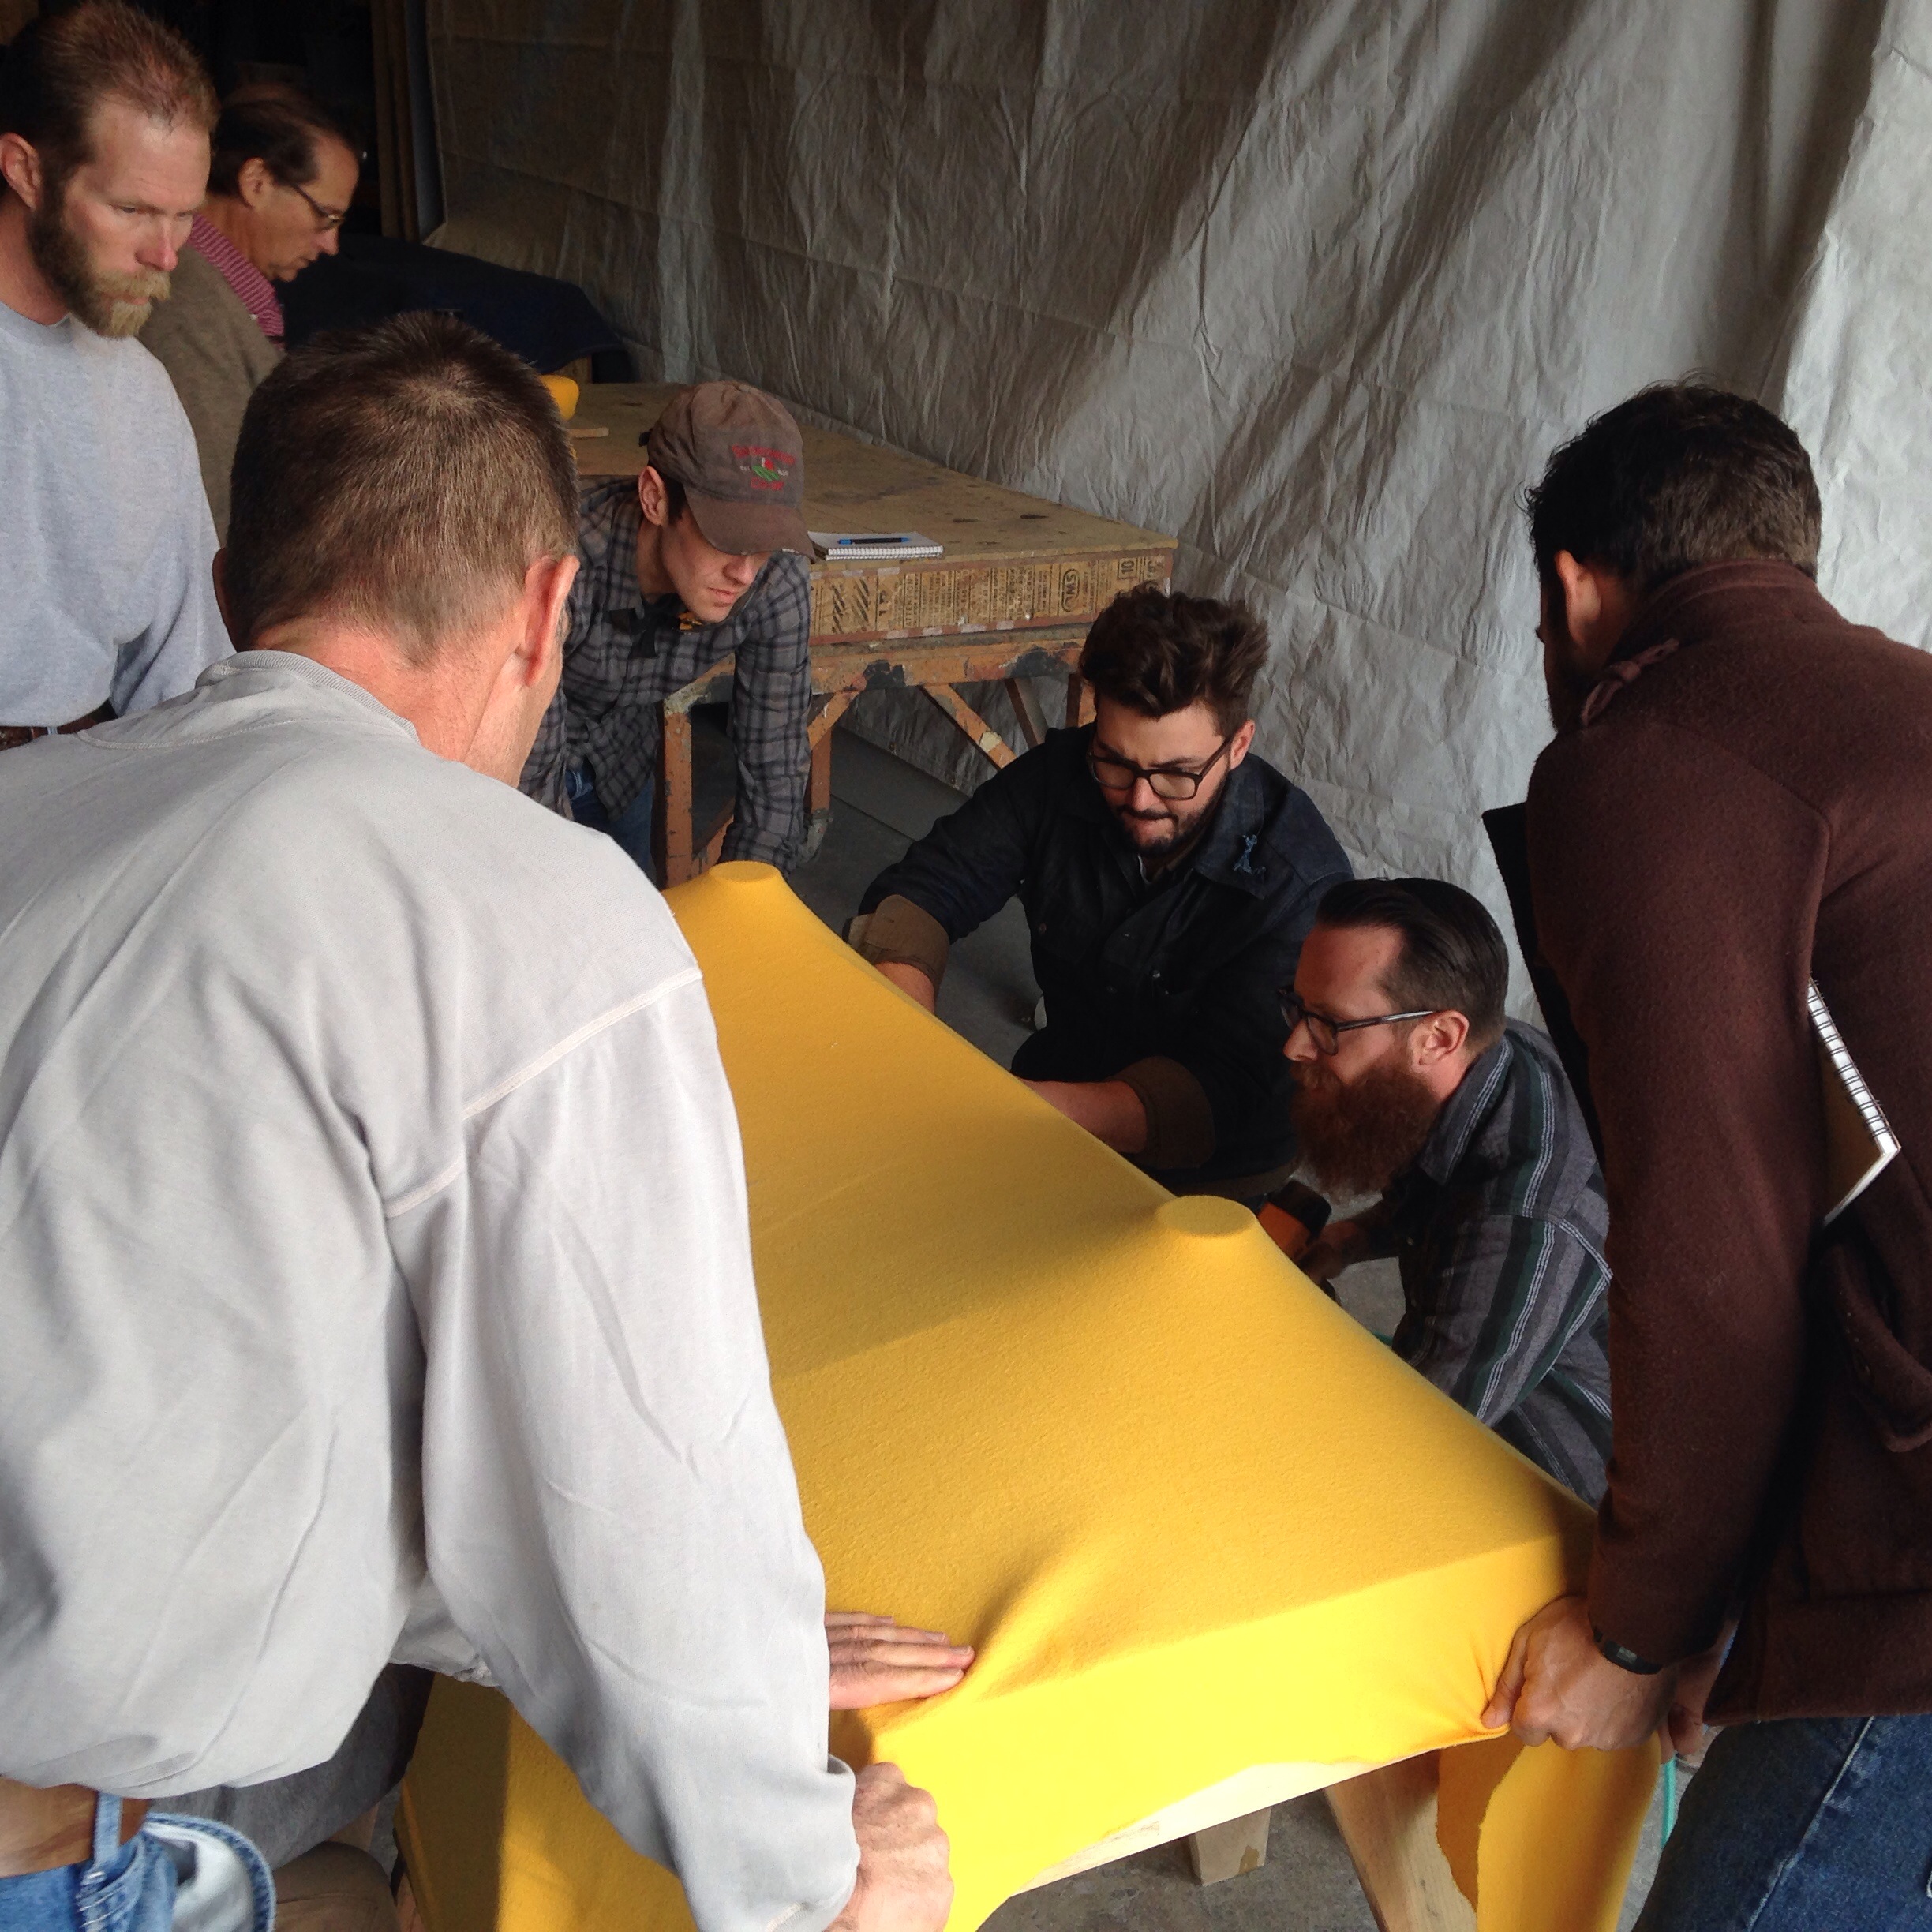  Attendees of a fabric-forming class in the process of creating an aesthetically beautiful and functional concrete sink 